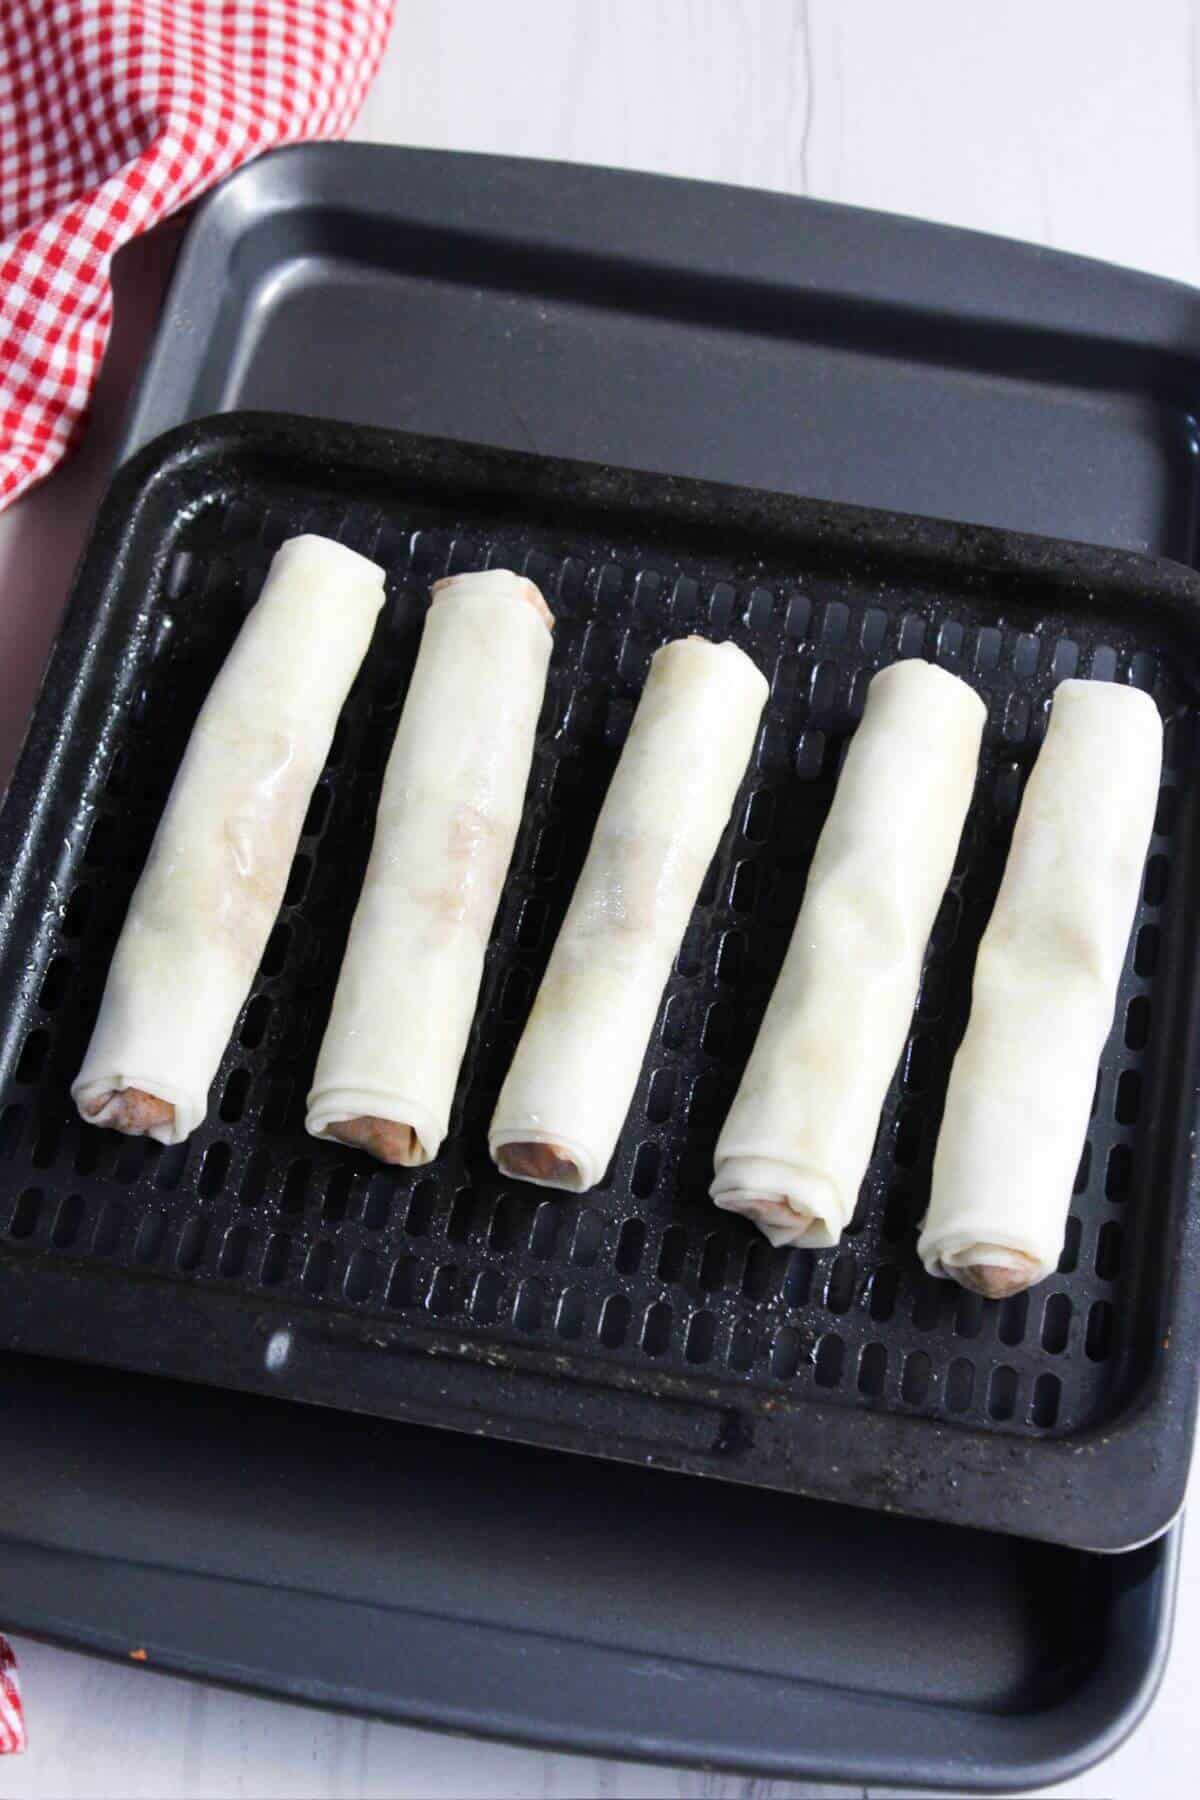 Uncooked lumpia rolls in an air fryer pan with a checkered checkered tablecloth.